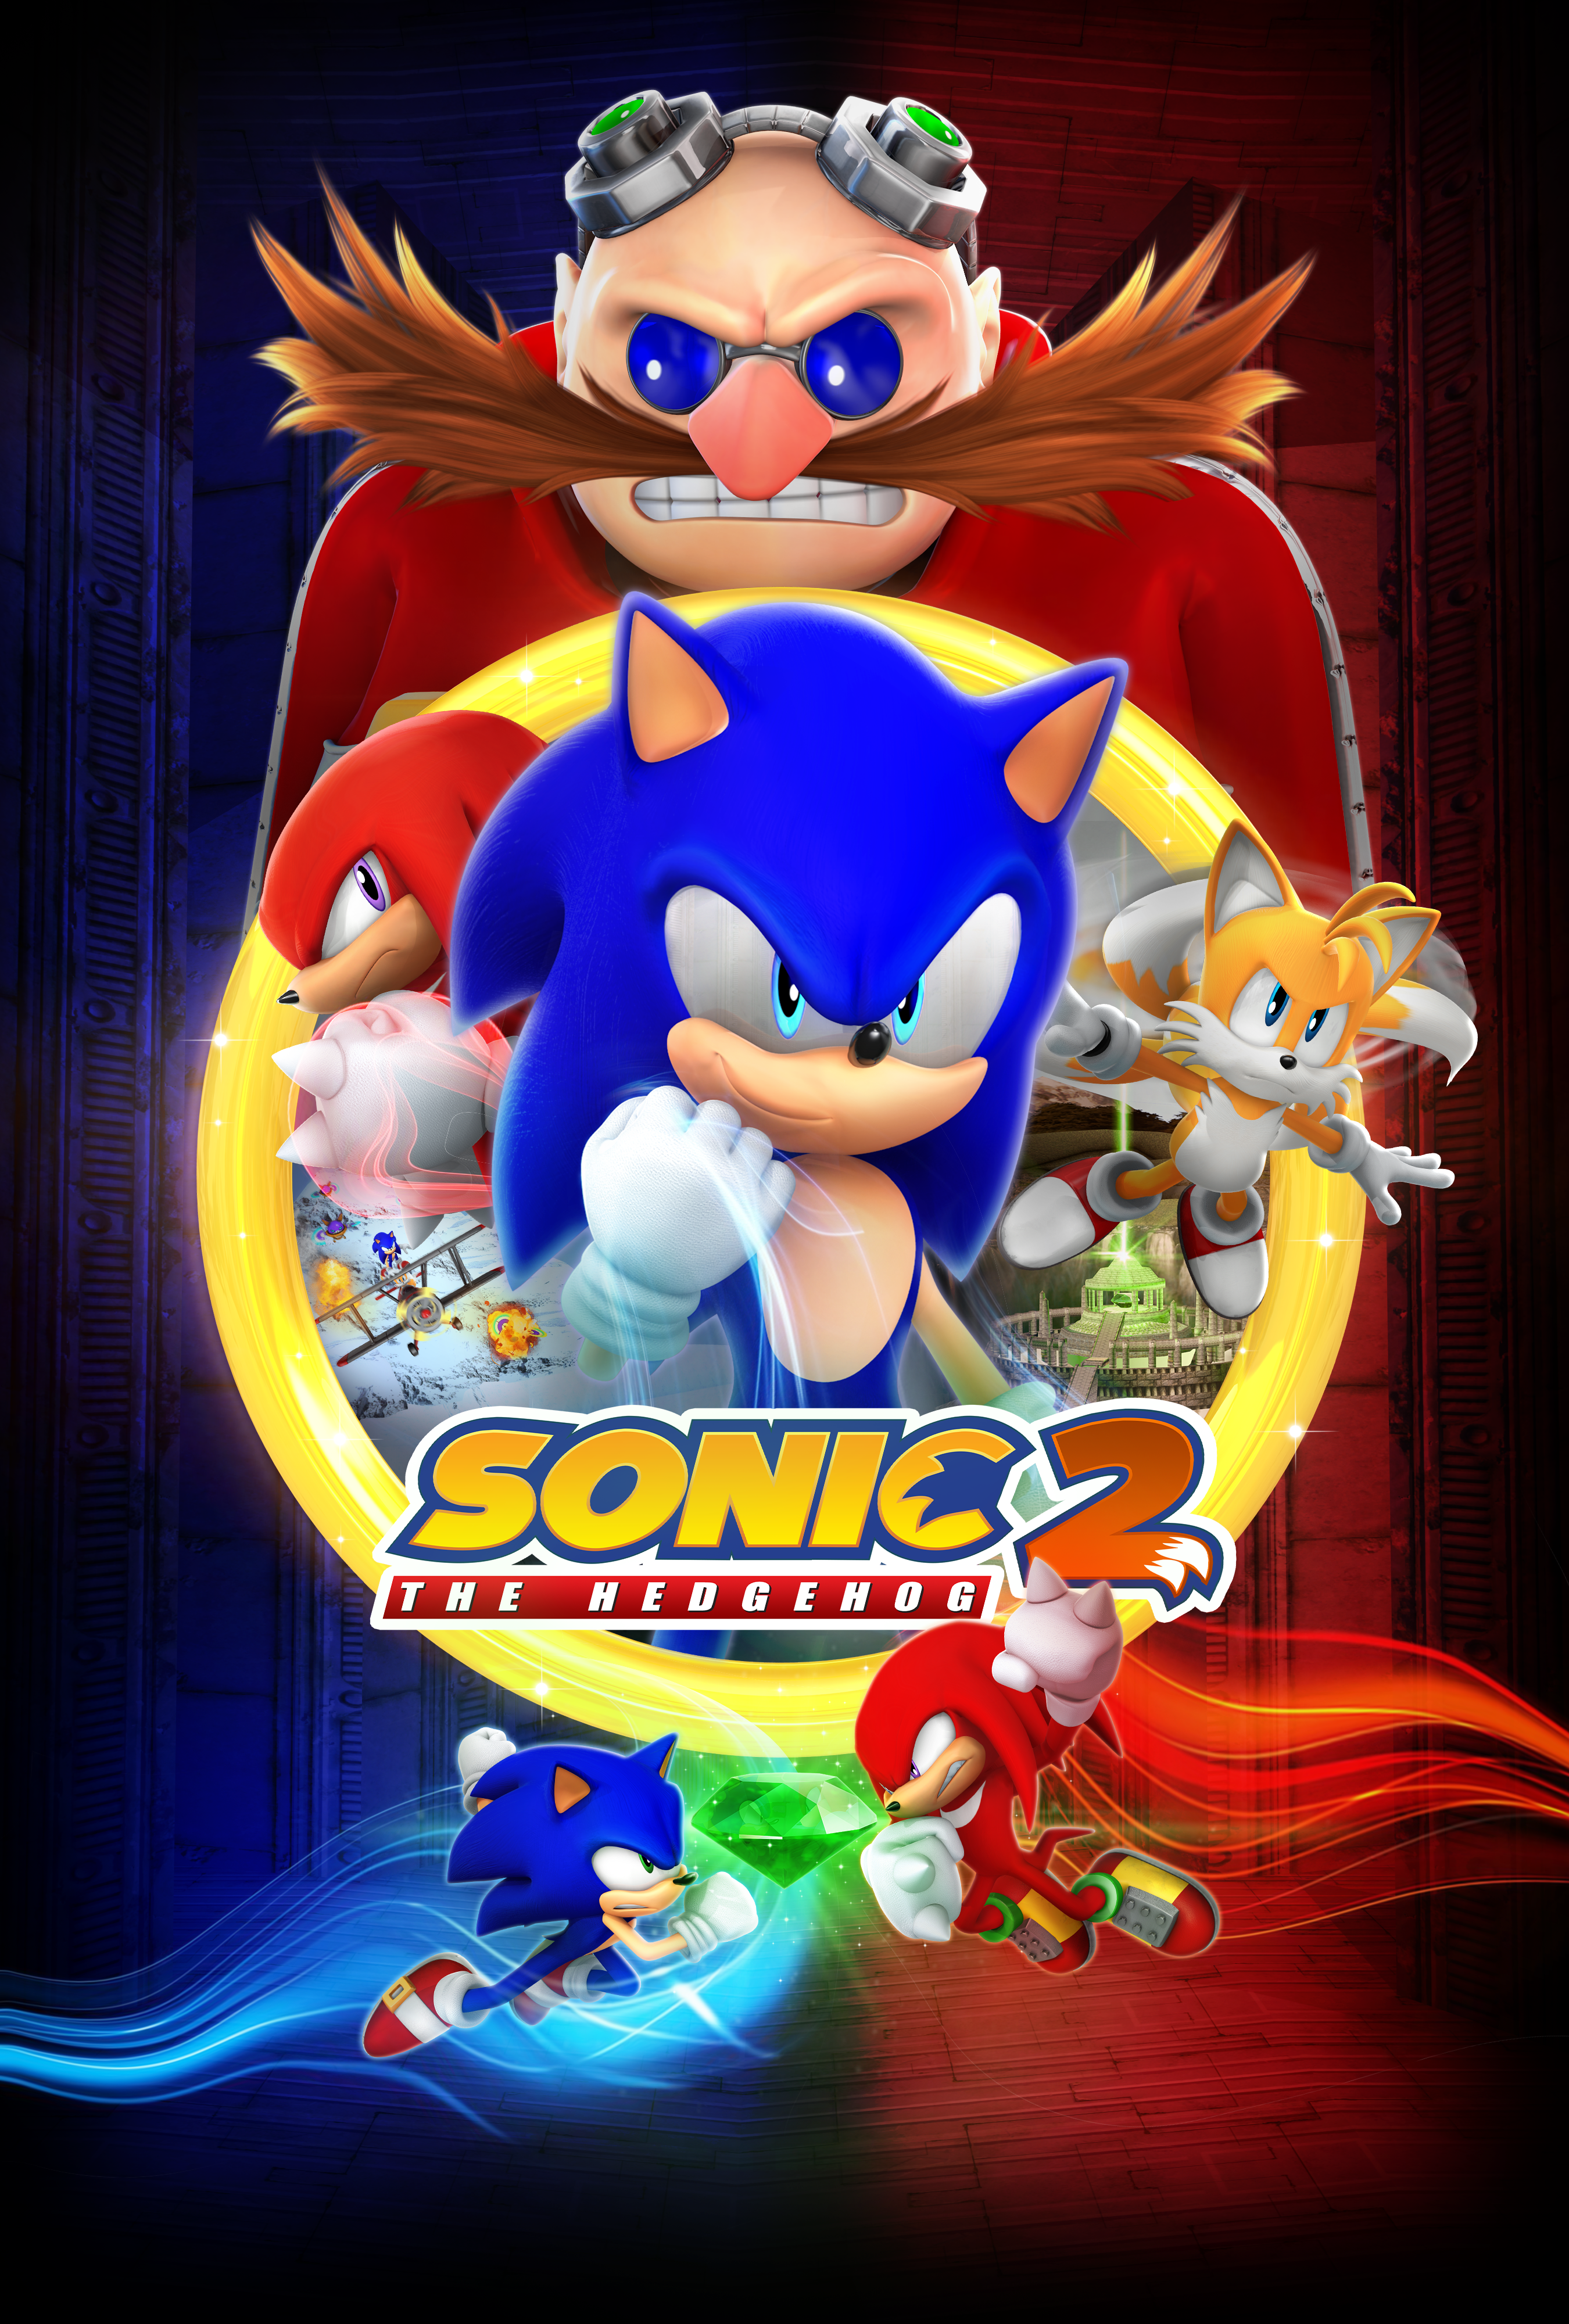 Sonic The Movie 2 Poster SMS Remake Style by ZbvaTv on DeviantArt